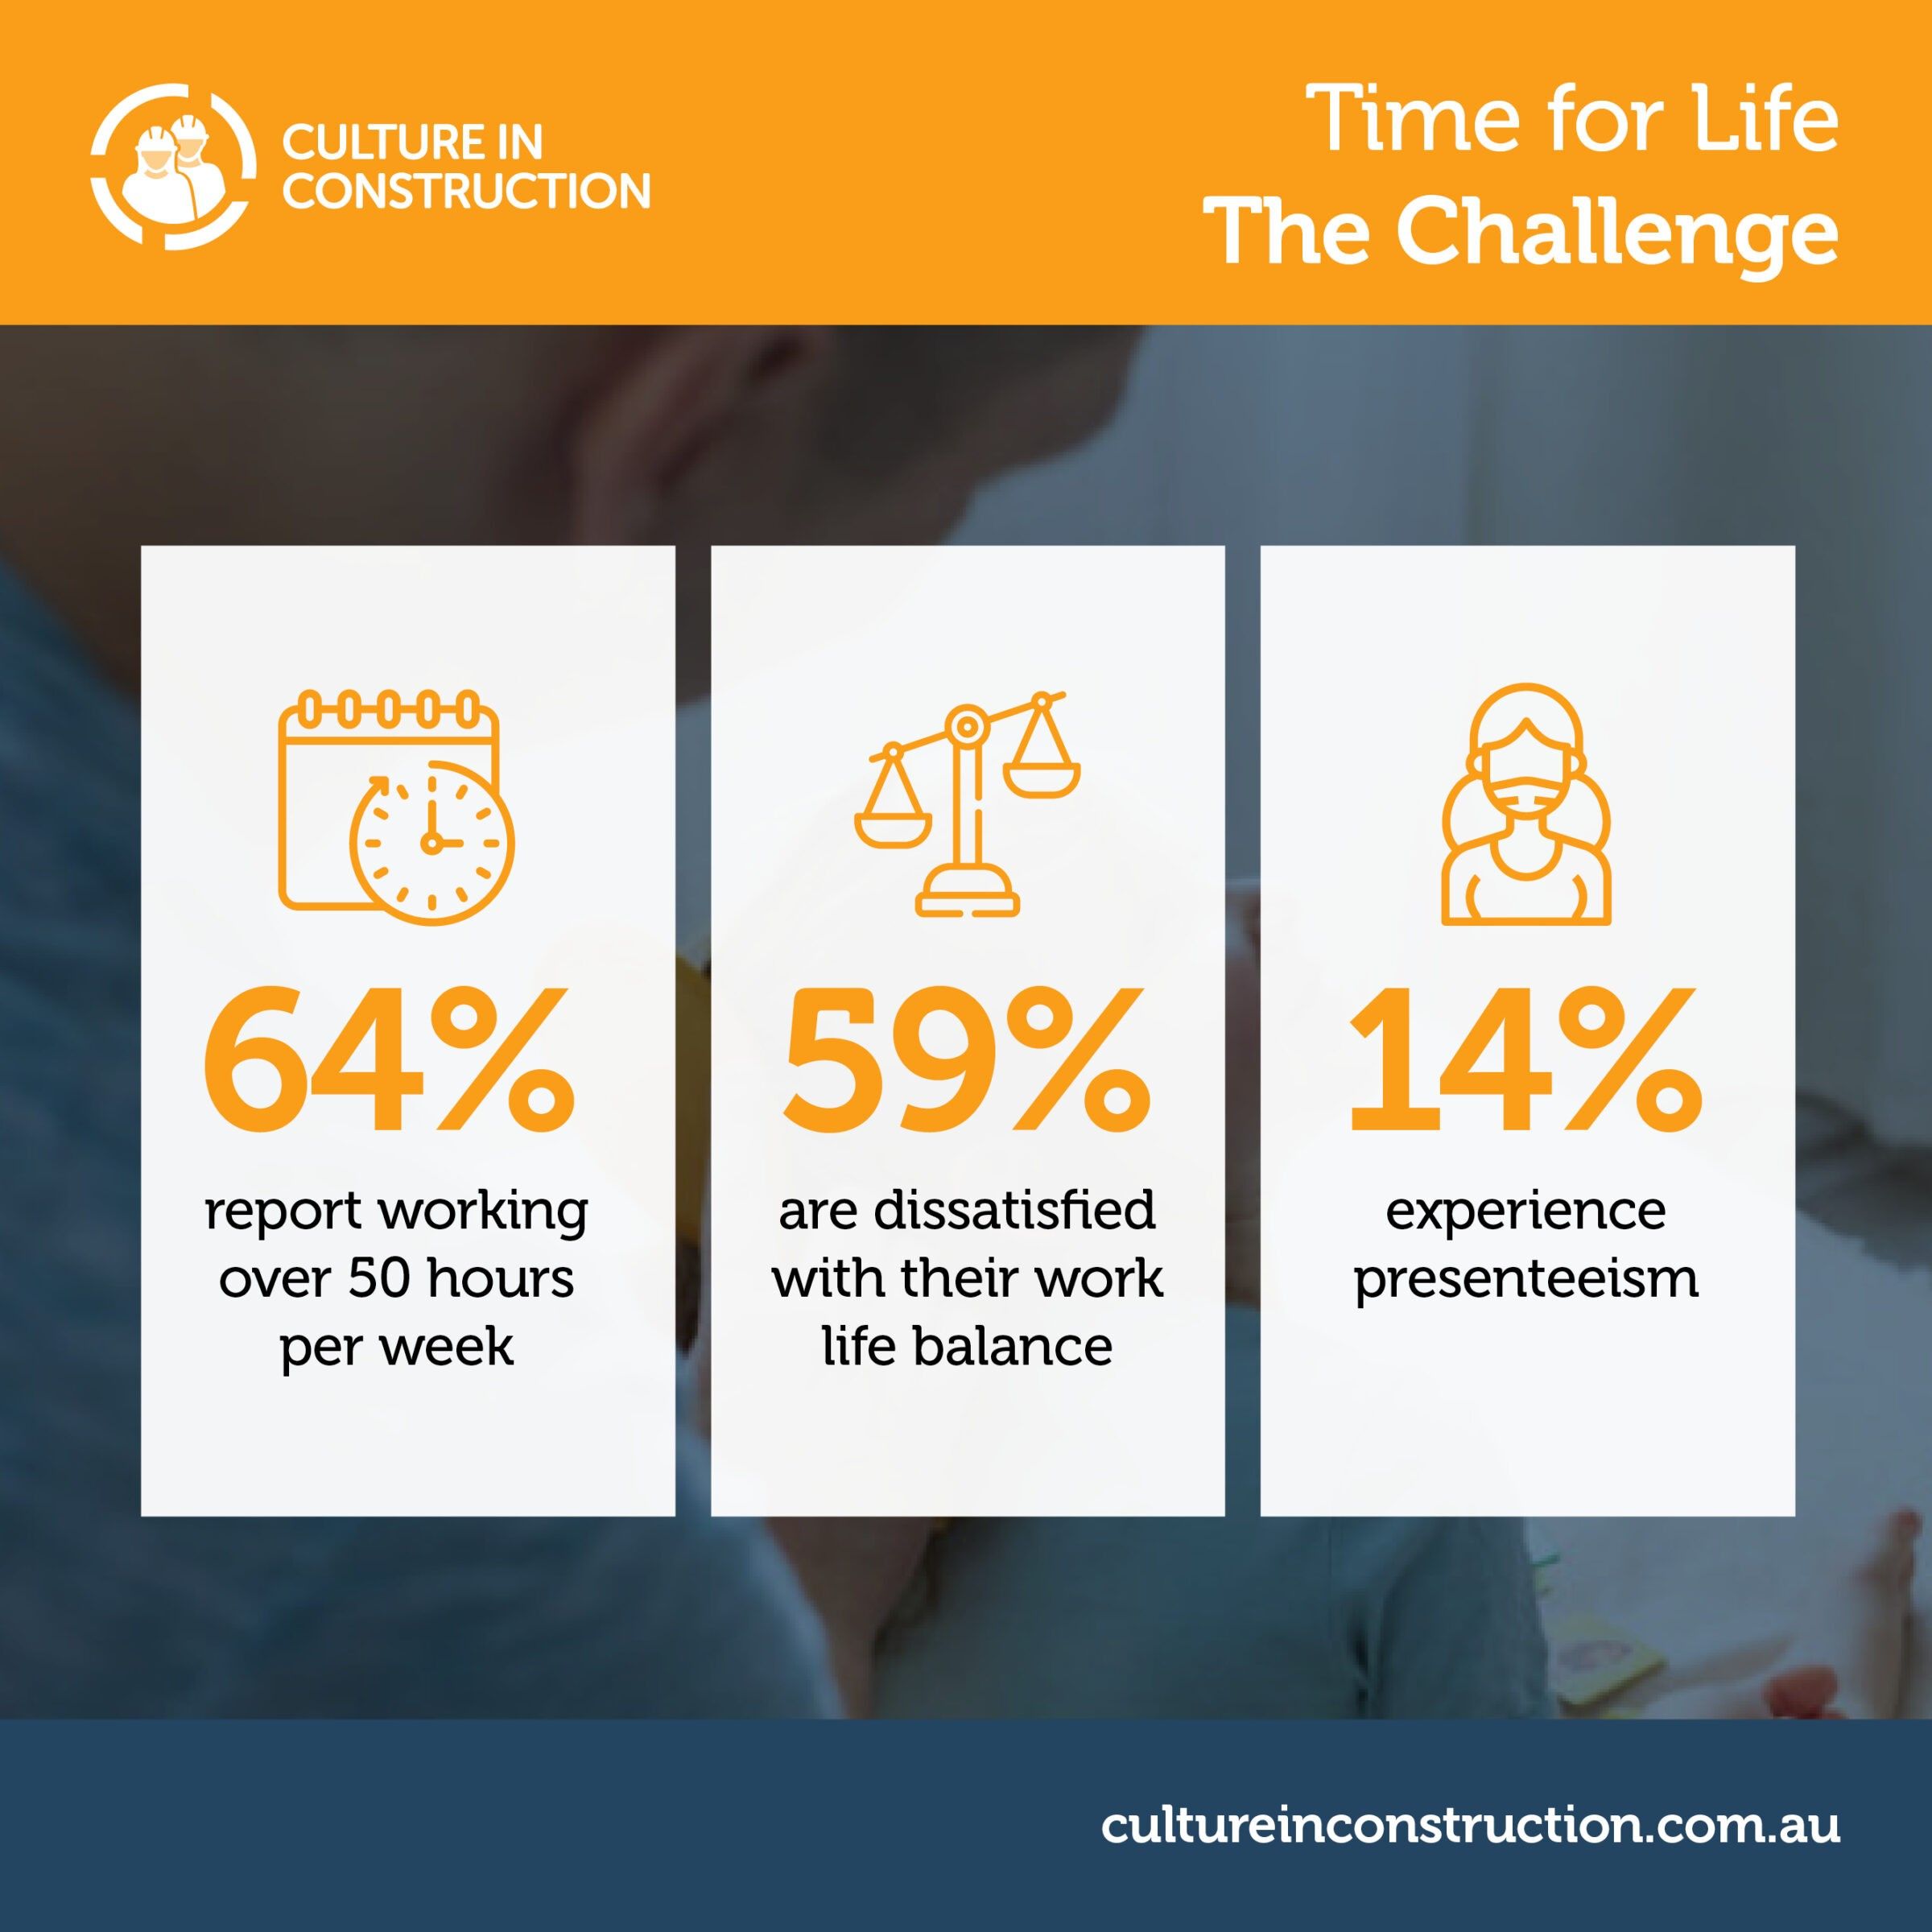 64% of construction workers report working over 50 hours per week, while 14% experience presenteeism